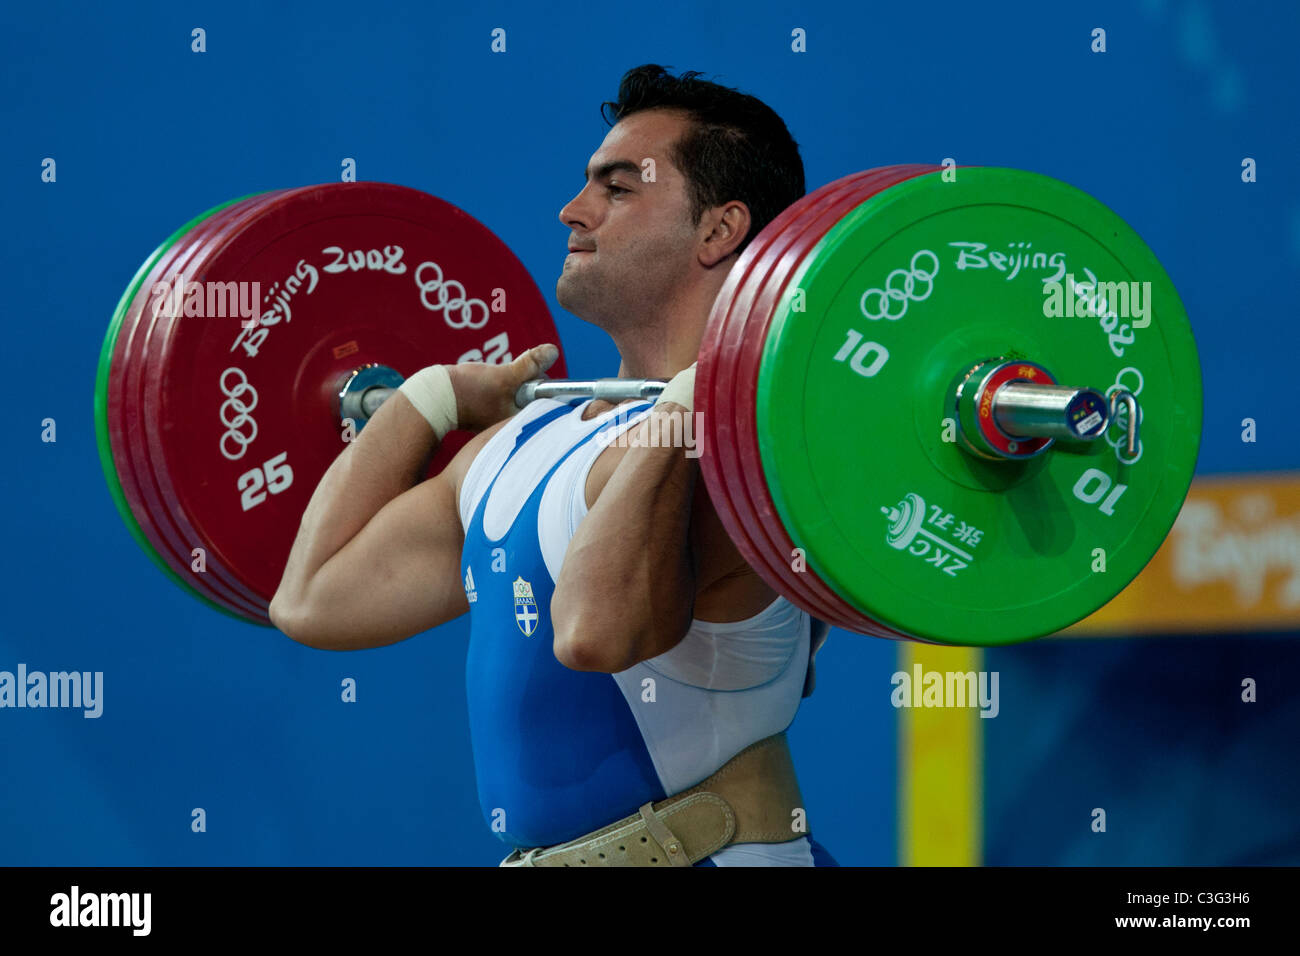 Konstantinos Gkaripis (GRE) competing in the Weightlifting 94kg class at the 2008 Olympic Summer Games, Beijing, China. Stock Photo